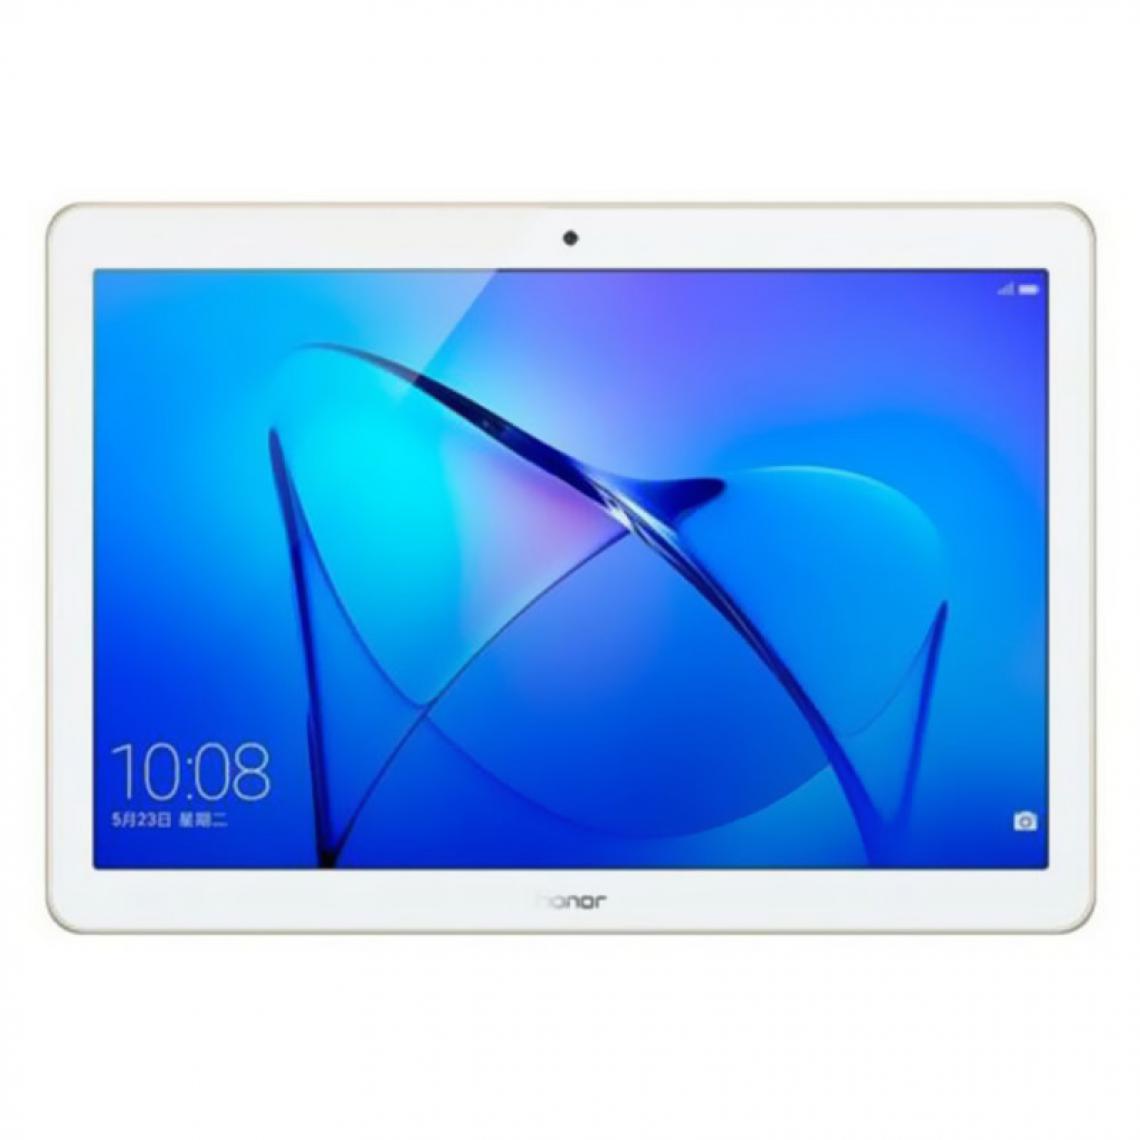 Huawei - Huawei MediaPad T3 10 (4G/LTE - 16 Go, 2 Go RAM - Or) - Tablette Android